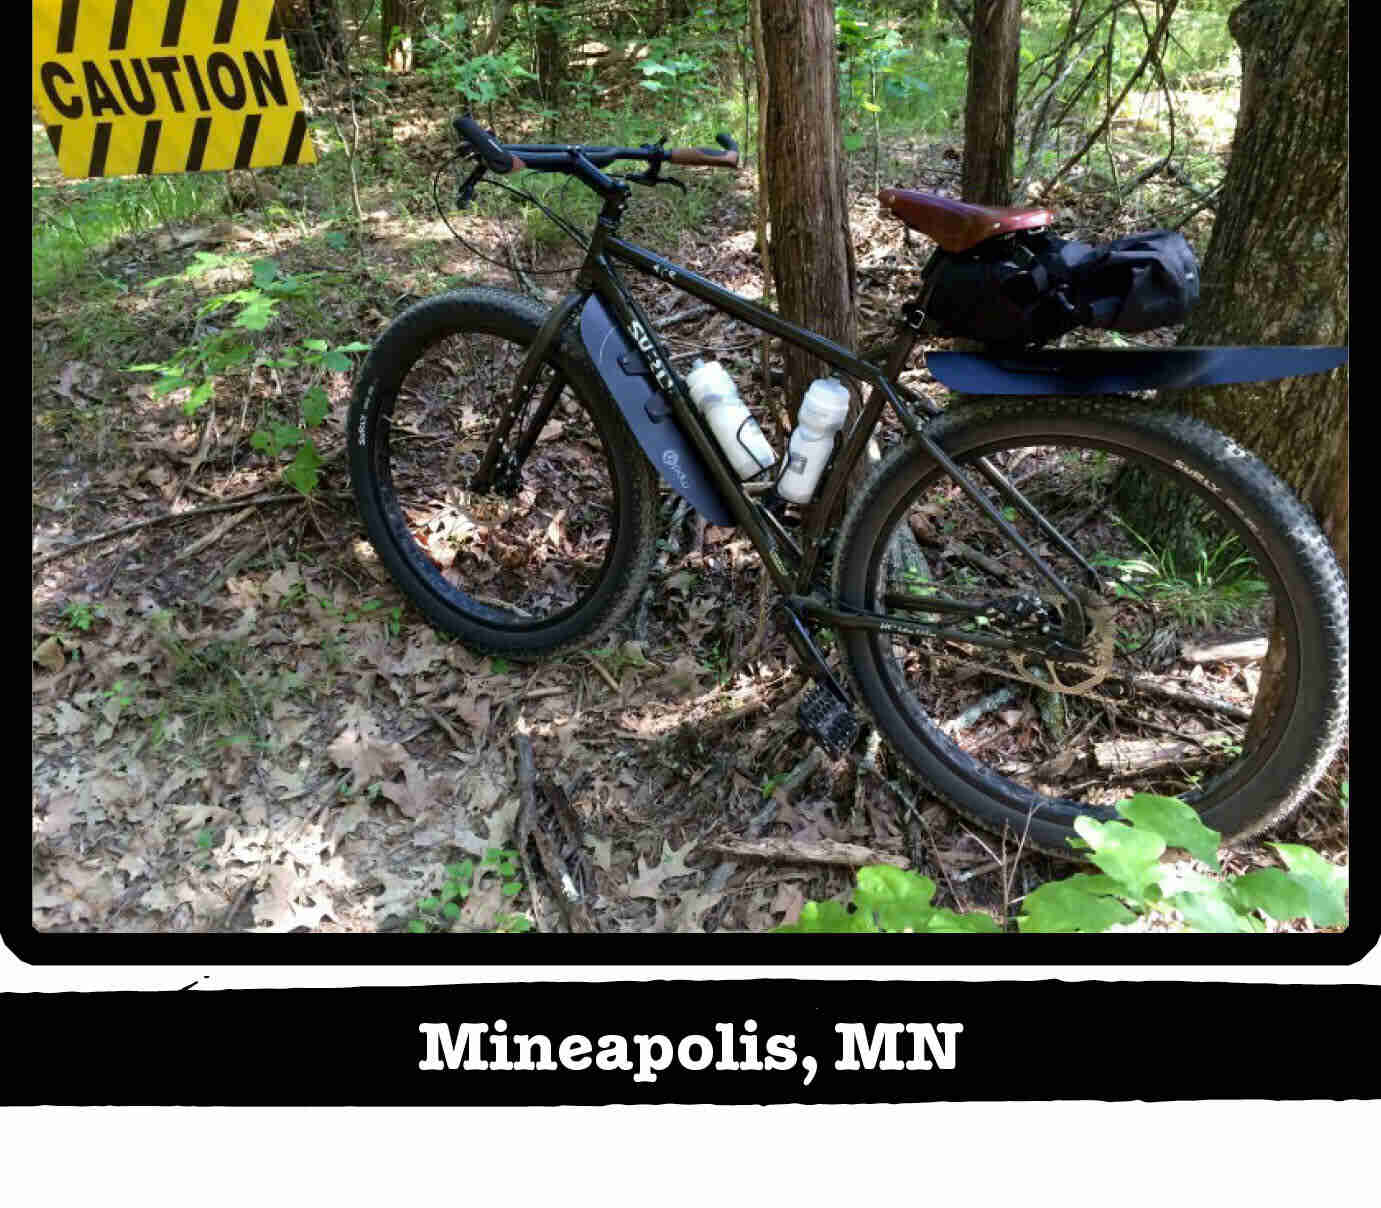 Left side view of a Surly ECR bike, olive, in the woods with a caution sign - Minneapolis, MN tag below image